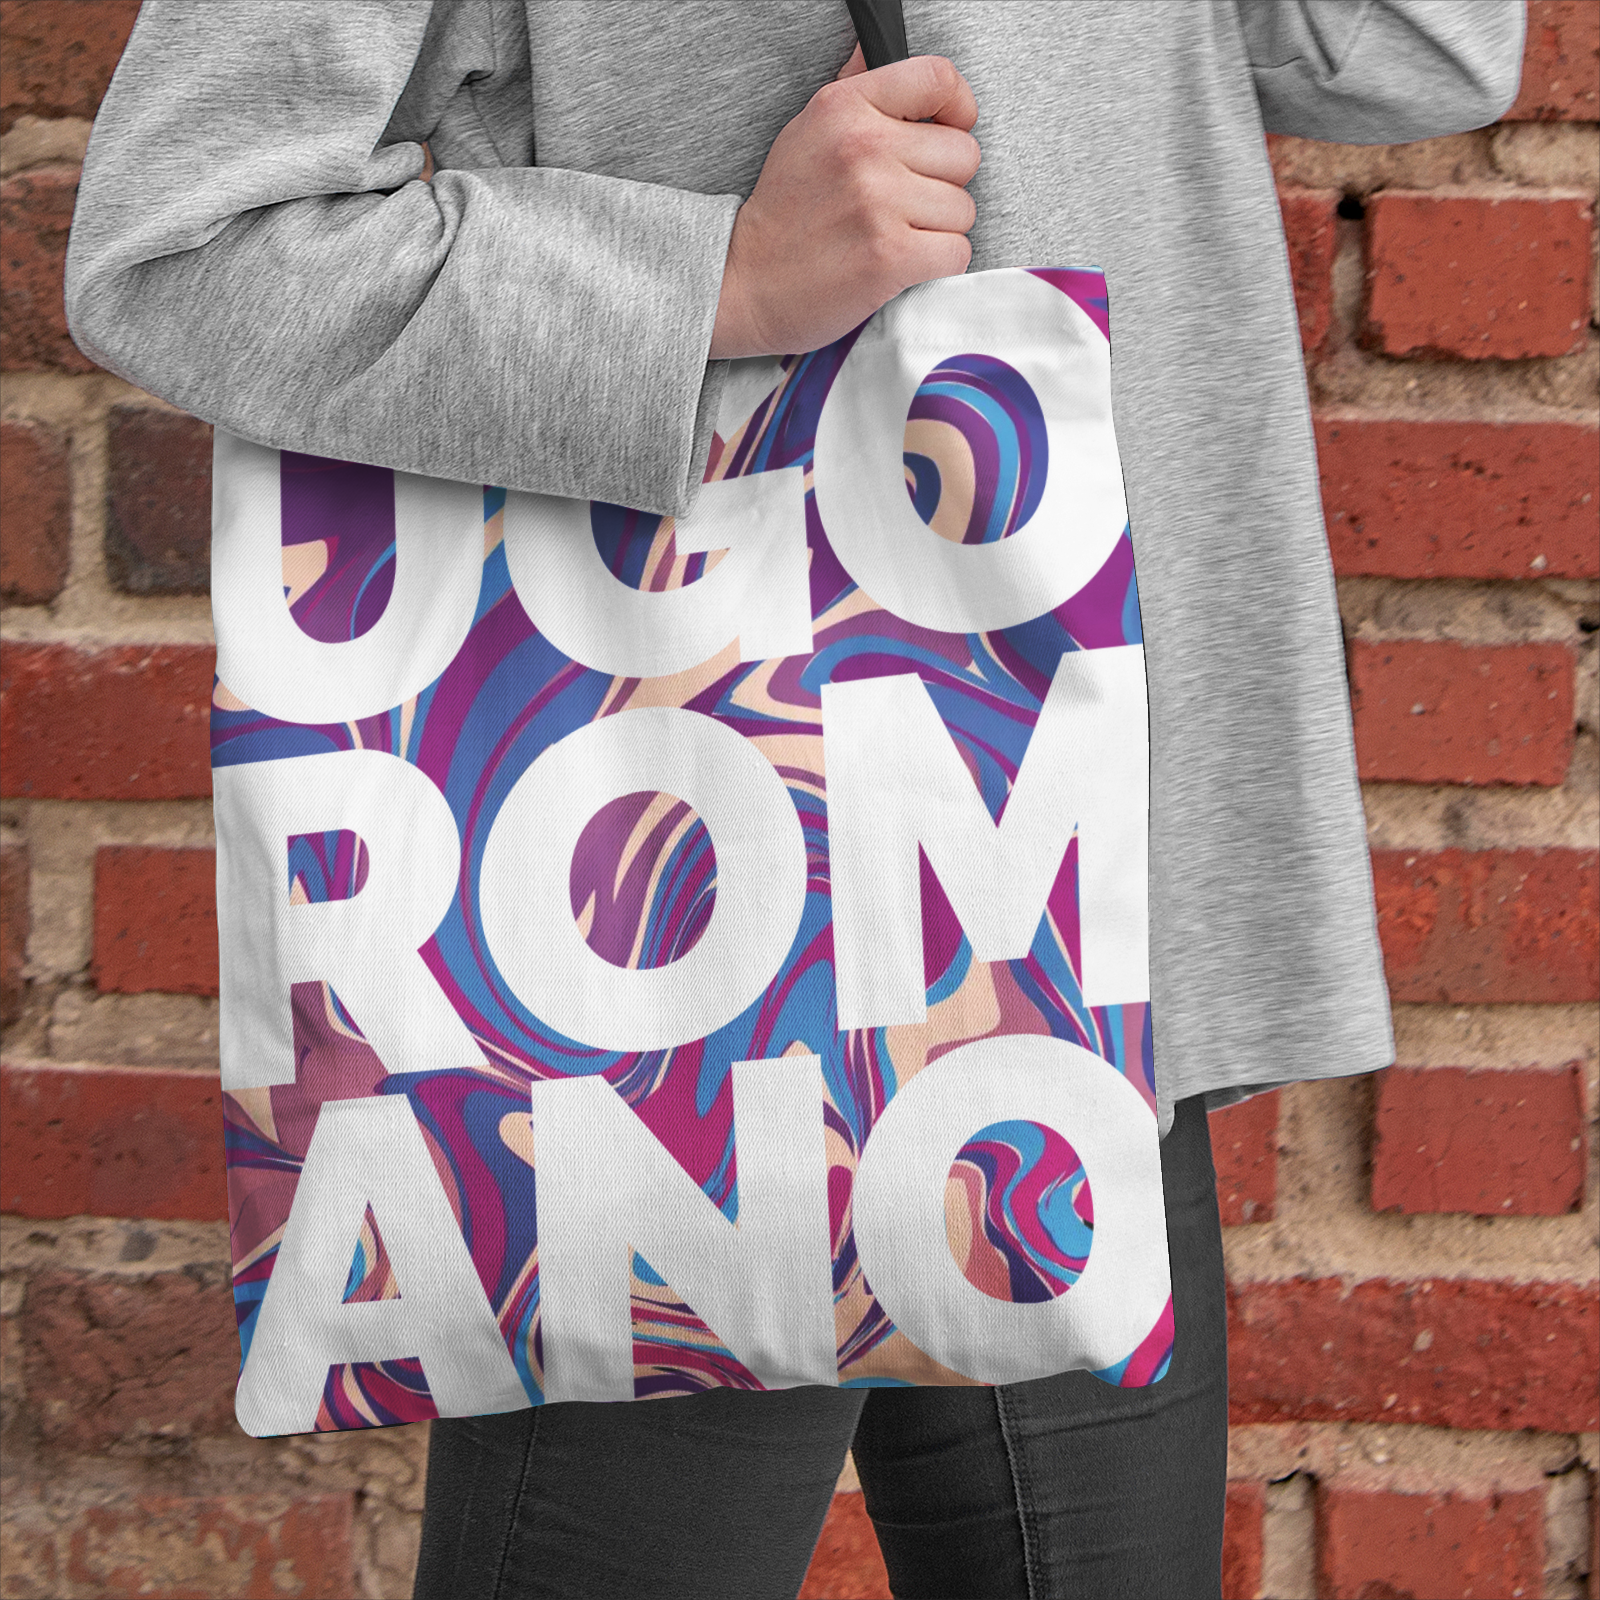 Heavy Duty and Strong Natural Cotton Canvas Tote Bag - UGO ROMANO URTB071